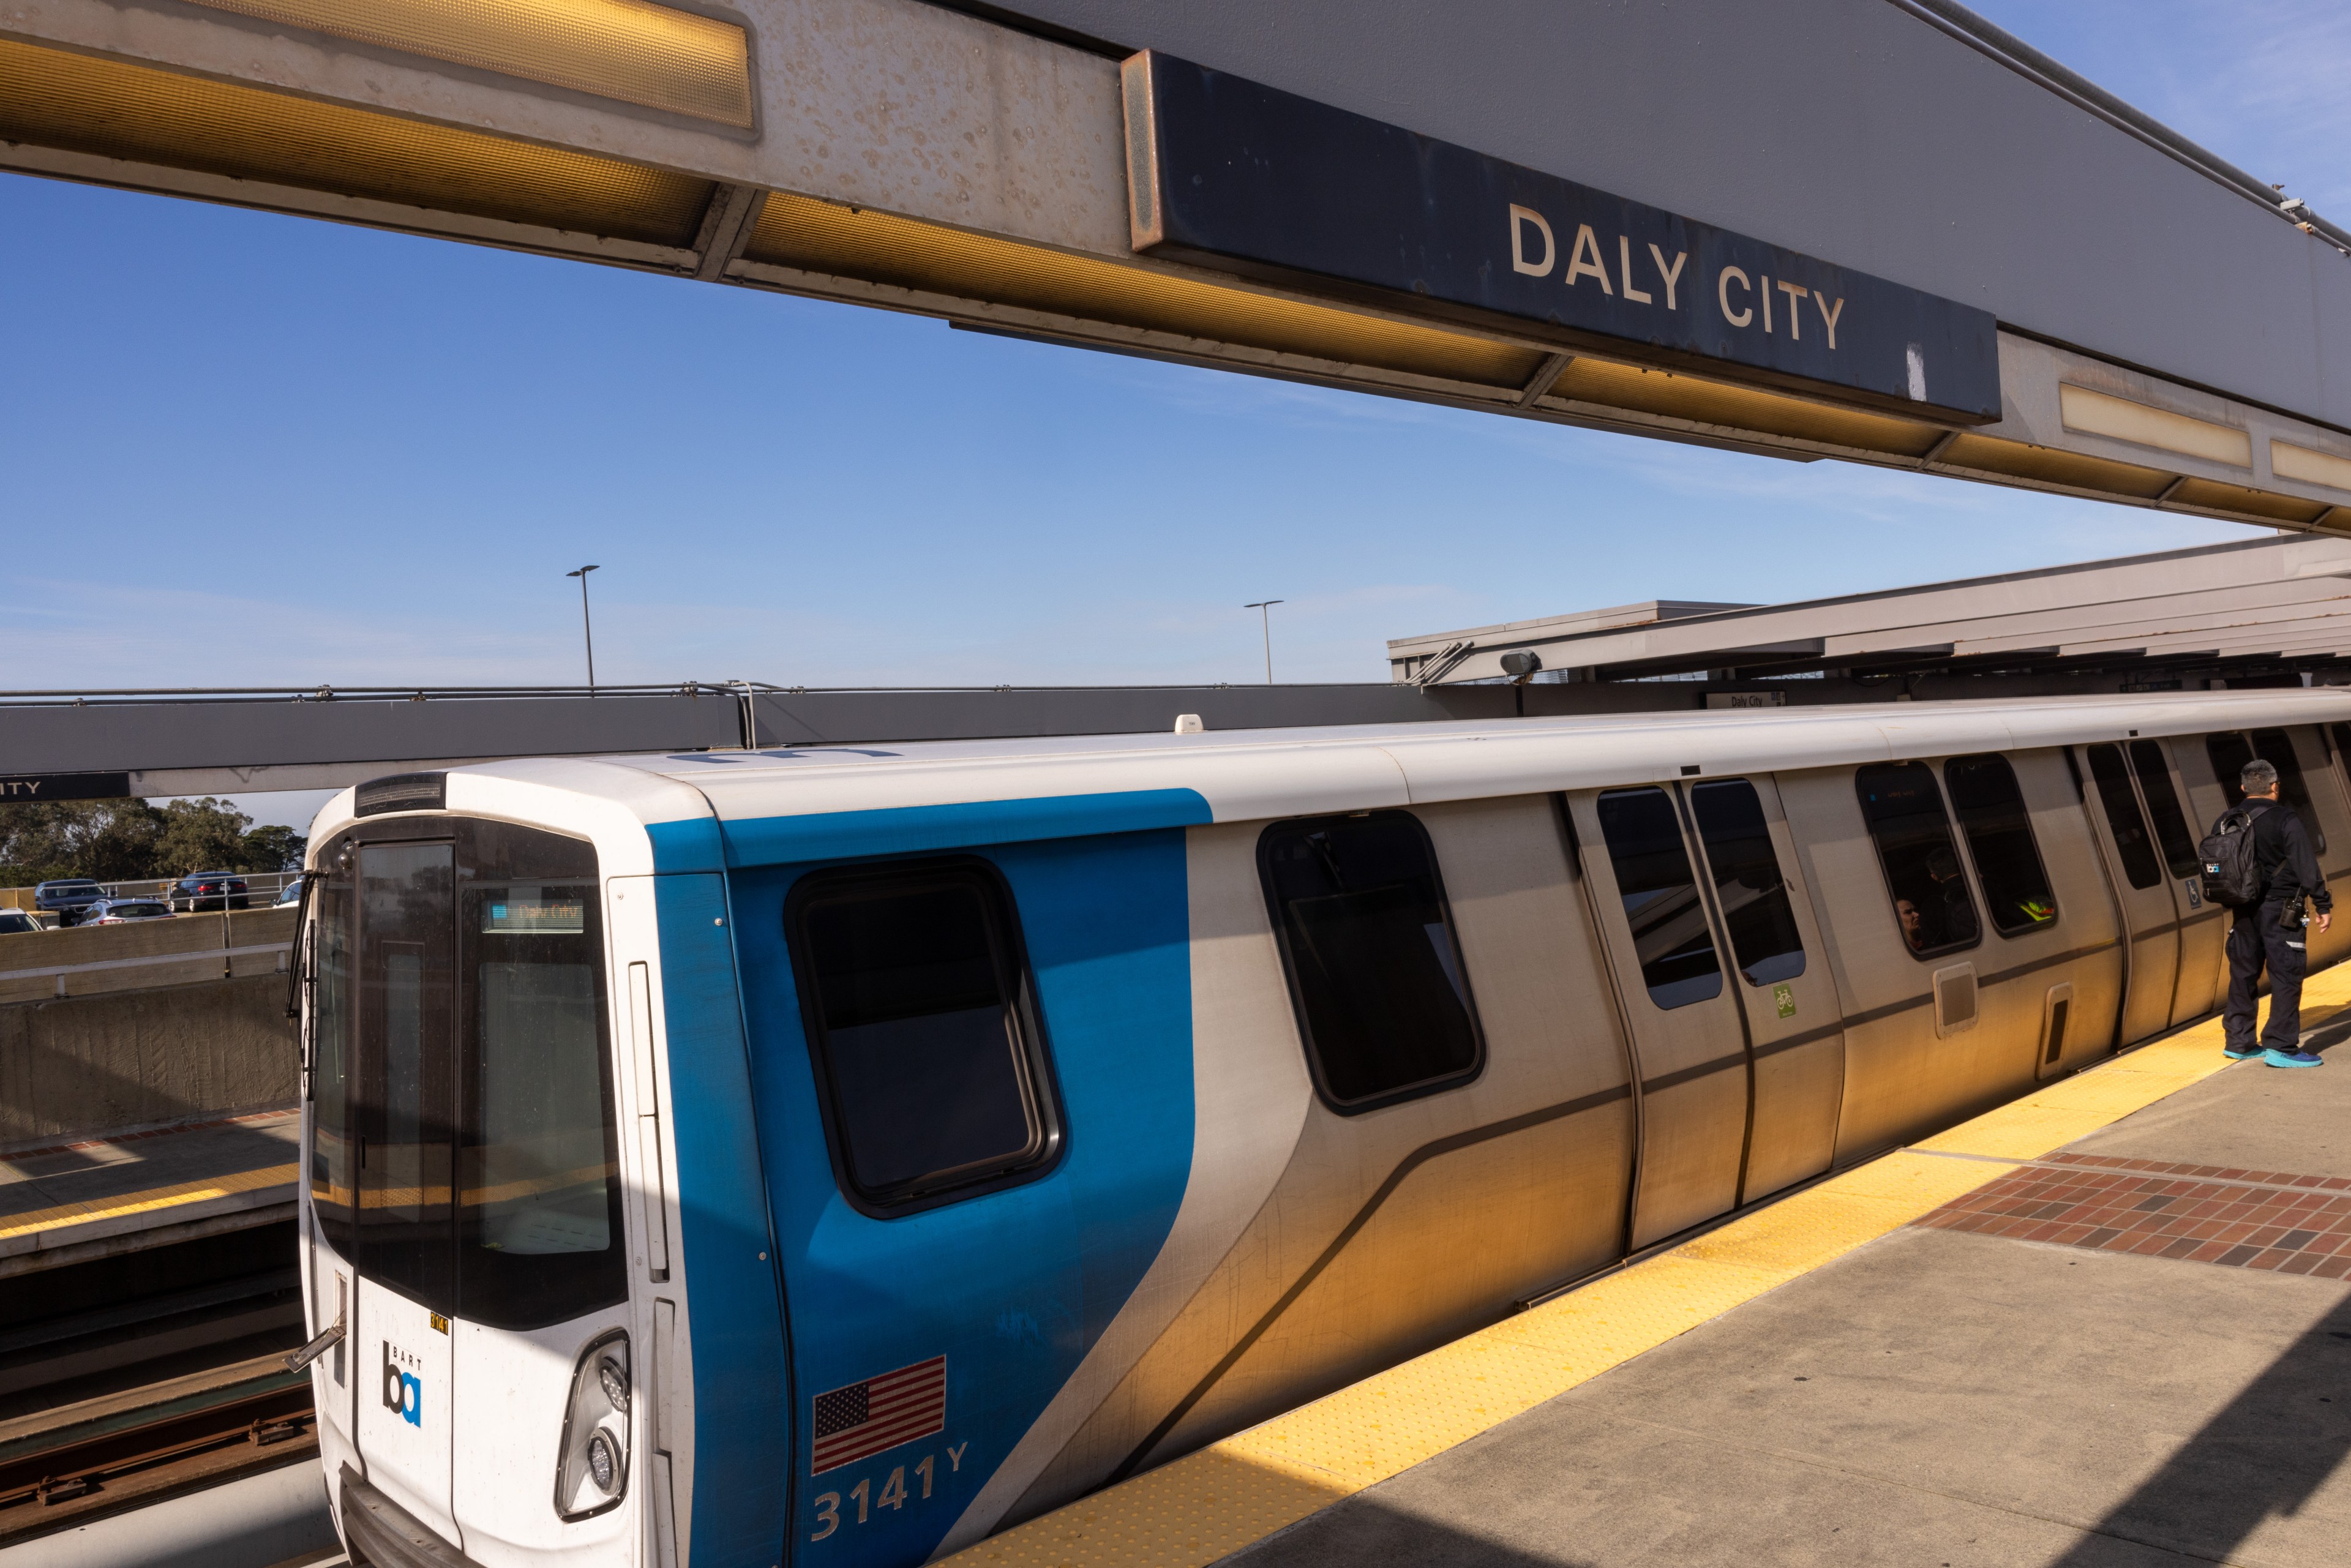 A train at Daly City station with a person on the platform under a clear sky.